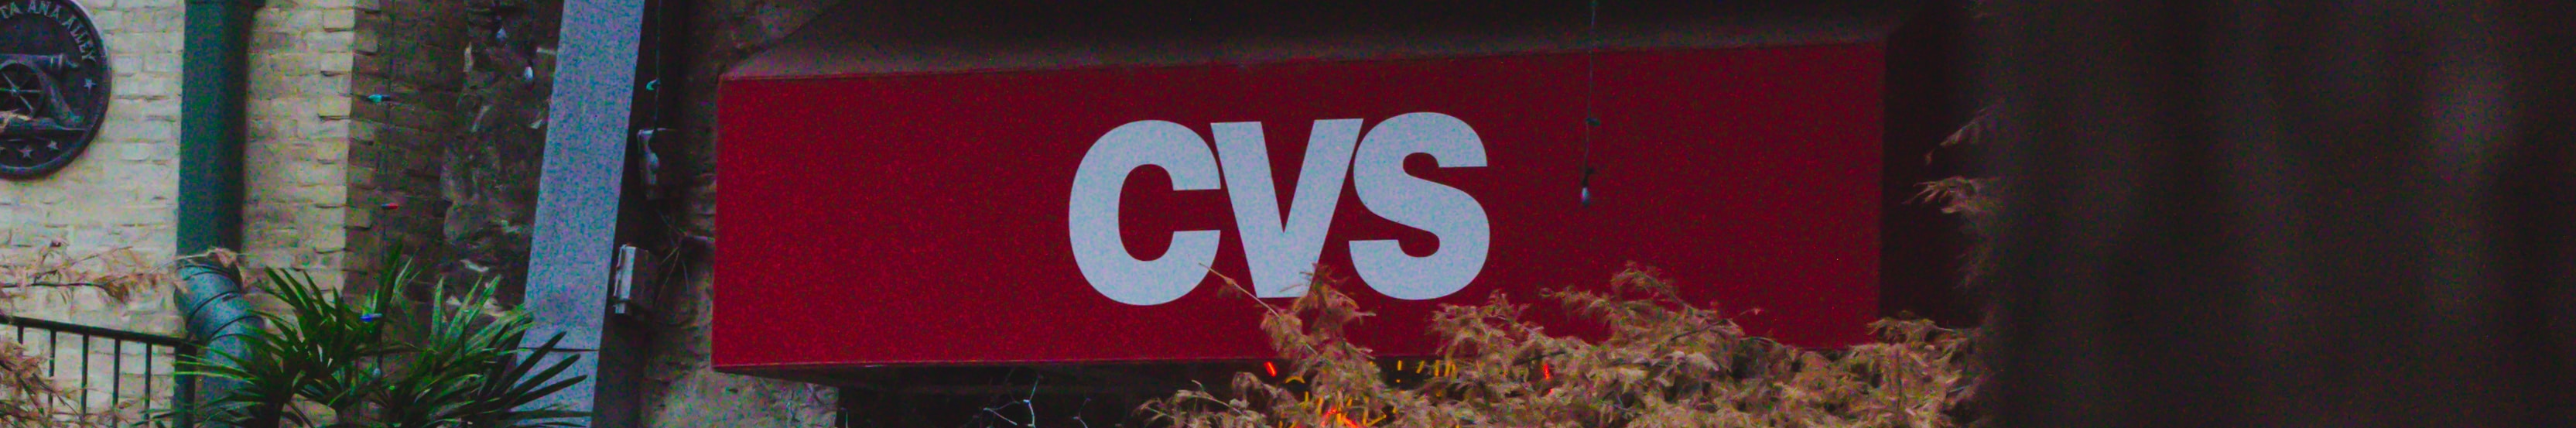 CVS Health contributes to economic growth by employing 316,975 people as at 2022